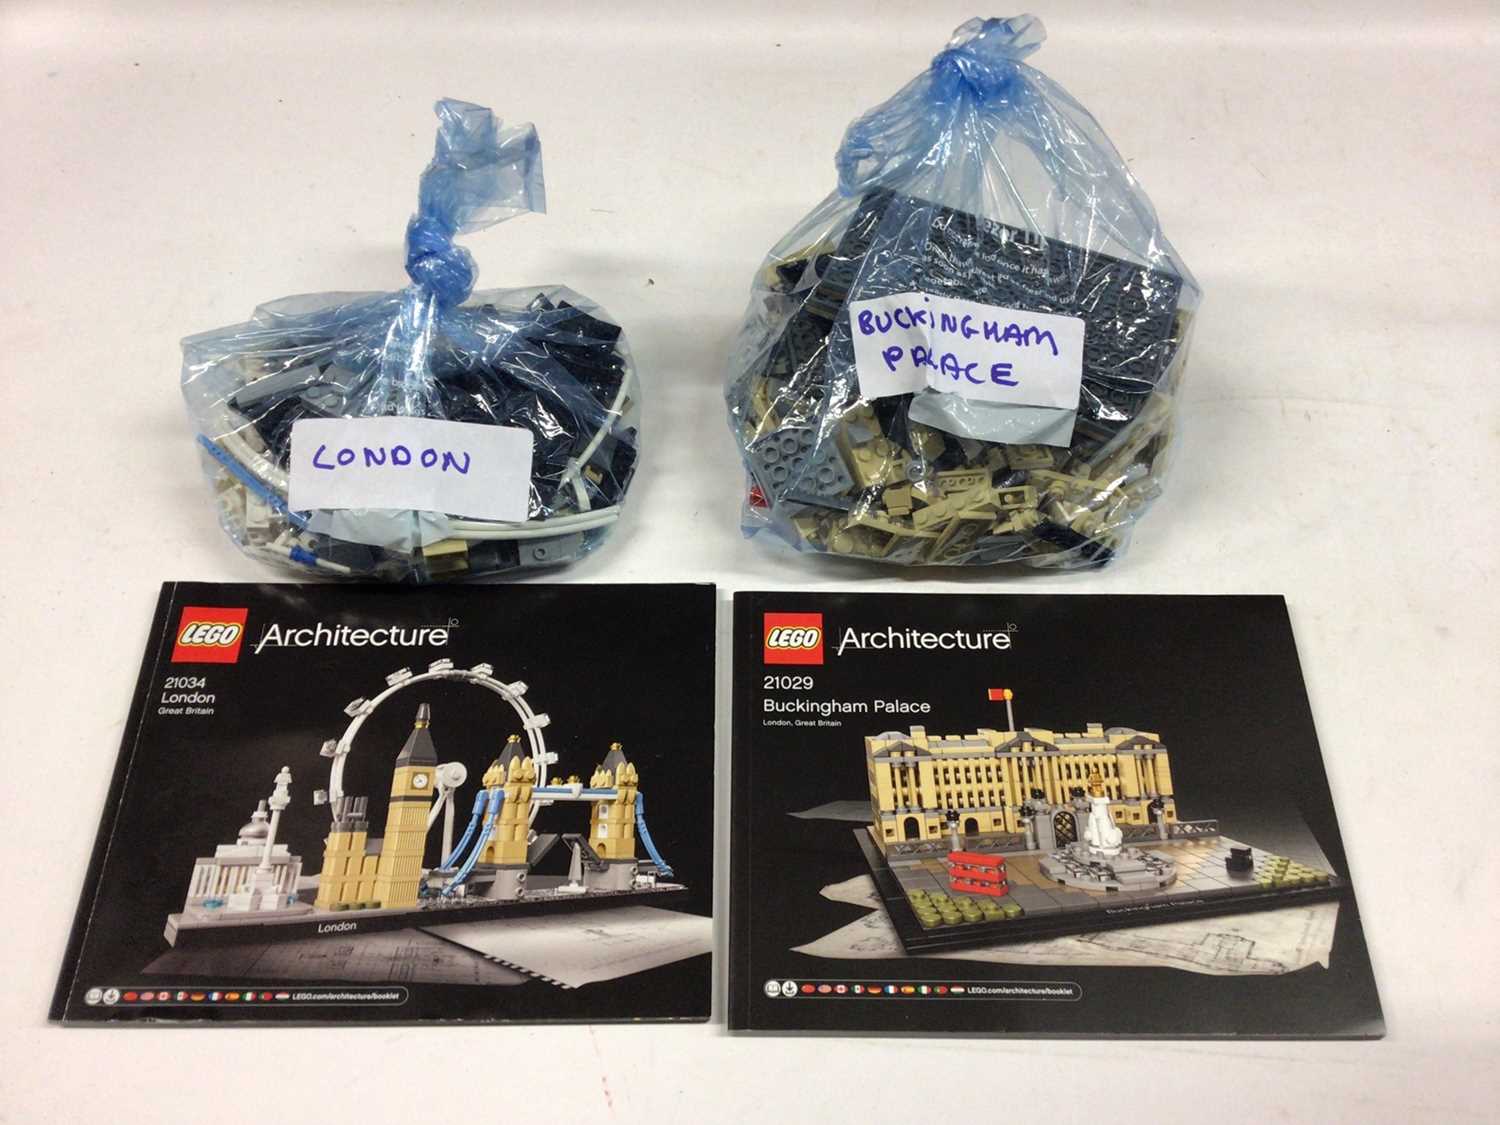 Lot 31 - Lego Architecture 21013 Big Ben, 21012 Sydney Opera House, 21032 Sydney with instructions available on line, 21034 London, 21029 Buckingham Palace, with instructions, all loose